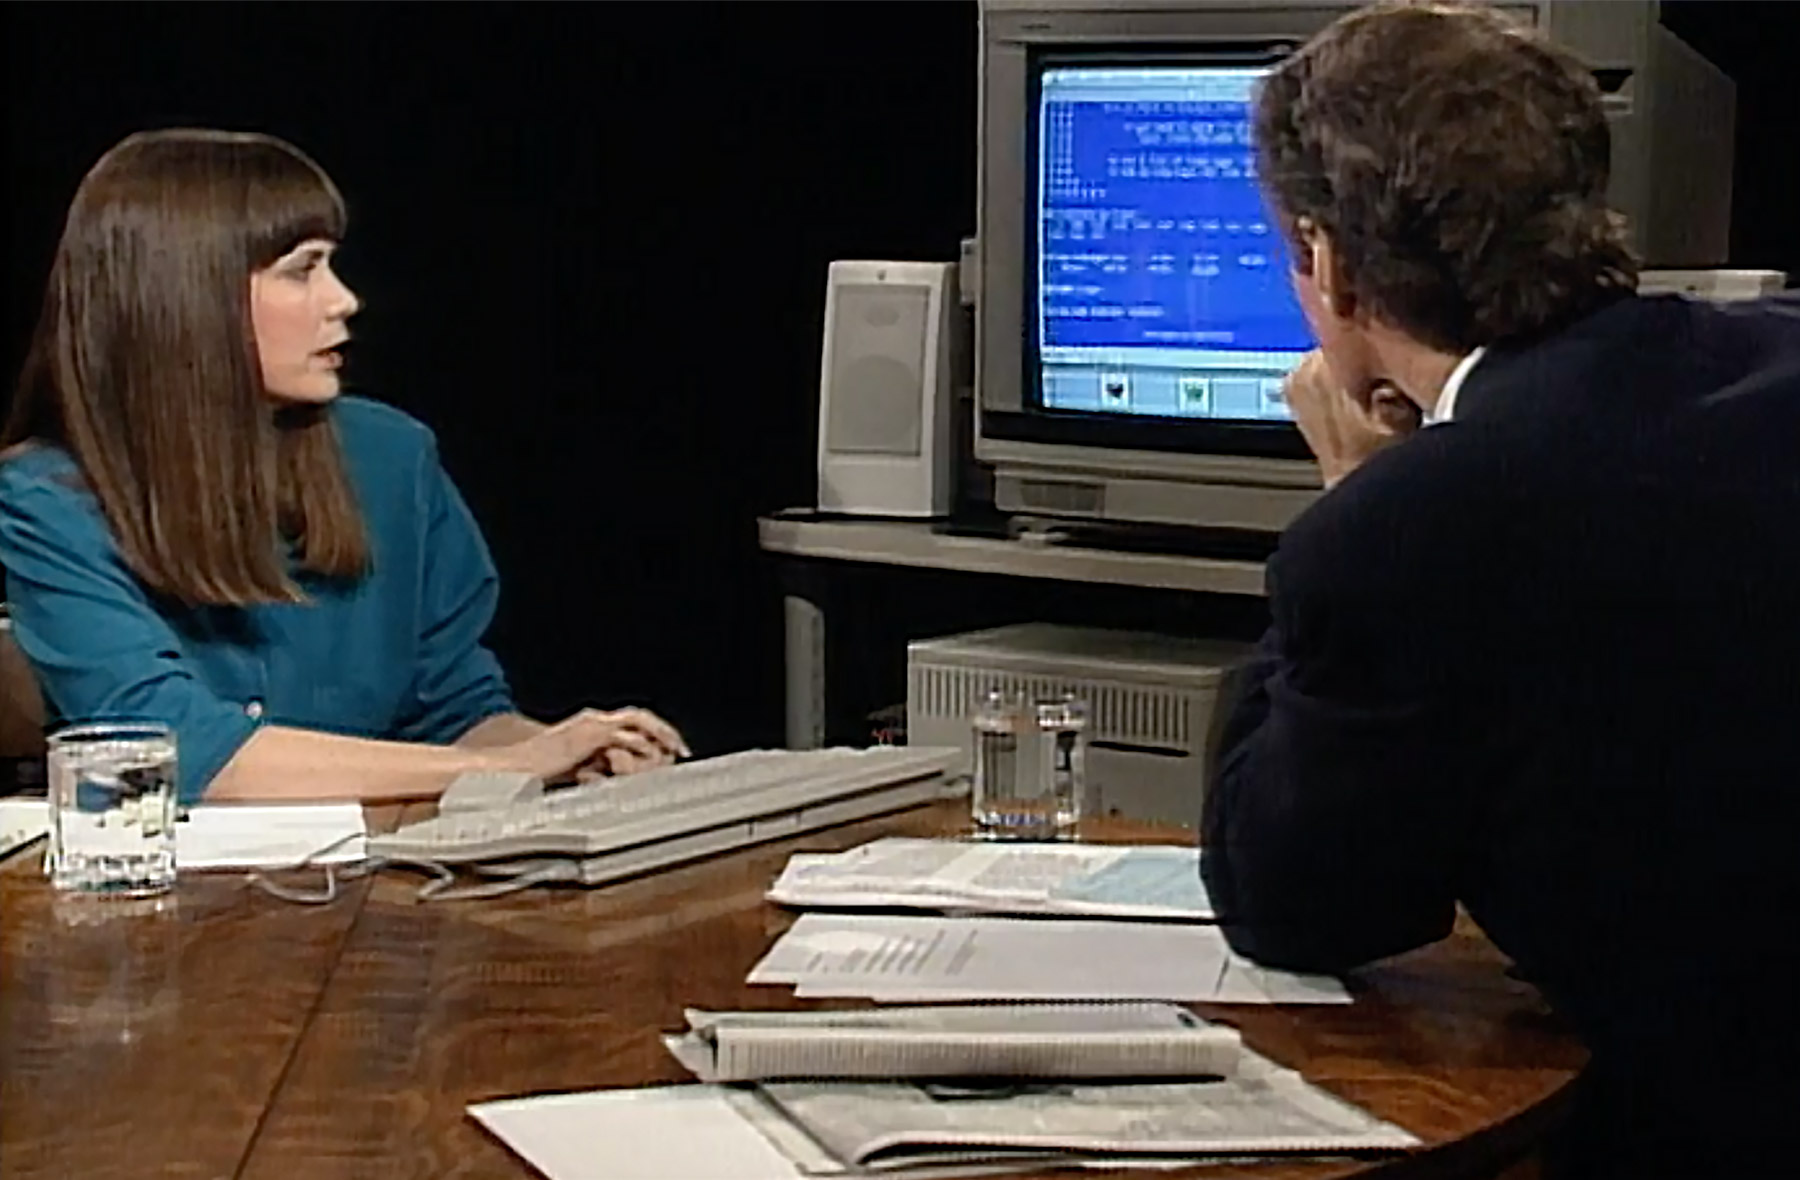 Horn and Charlie Rose on set during the filming of his show, looking at a computer screen.